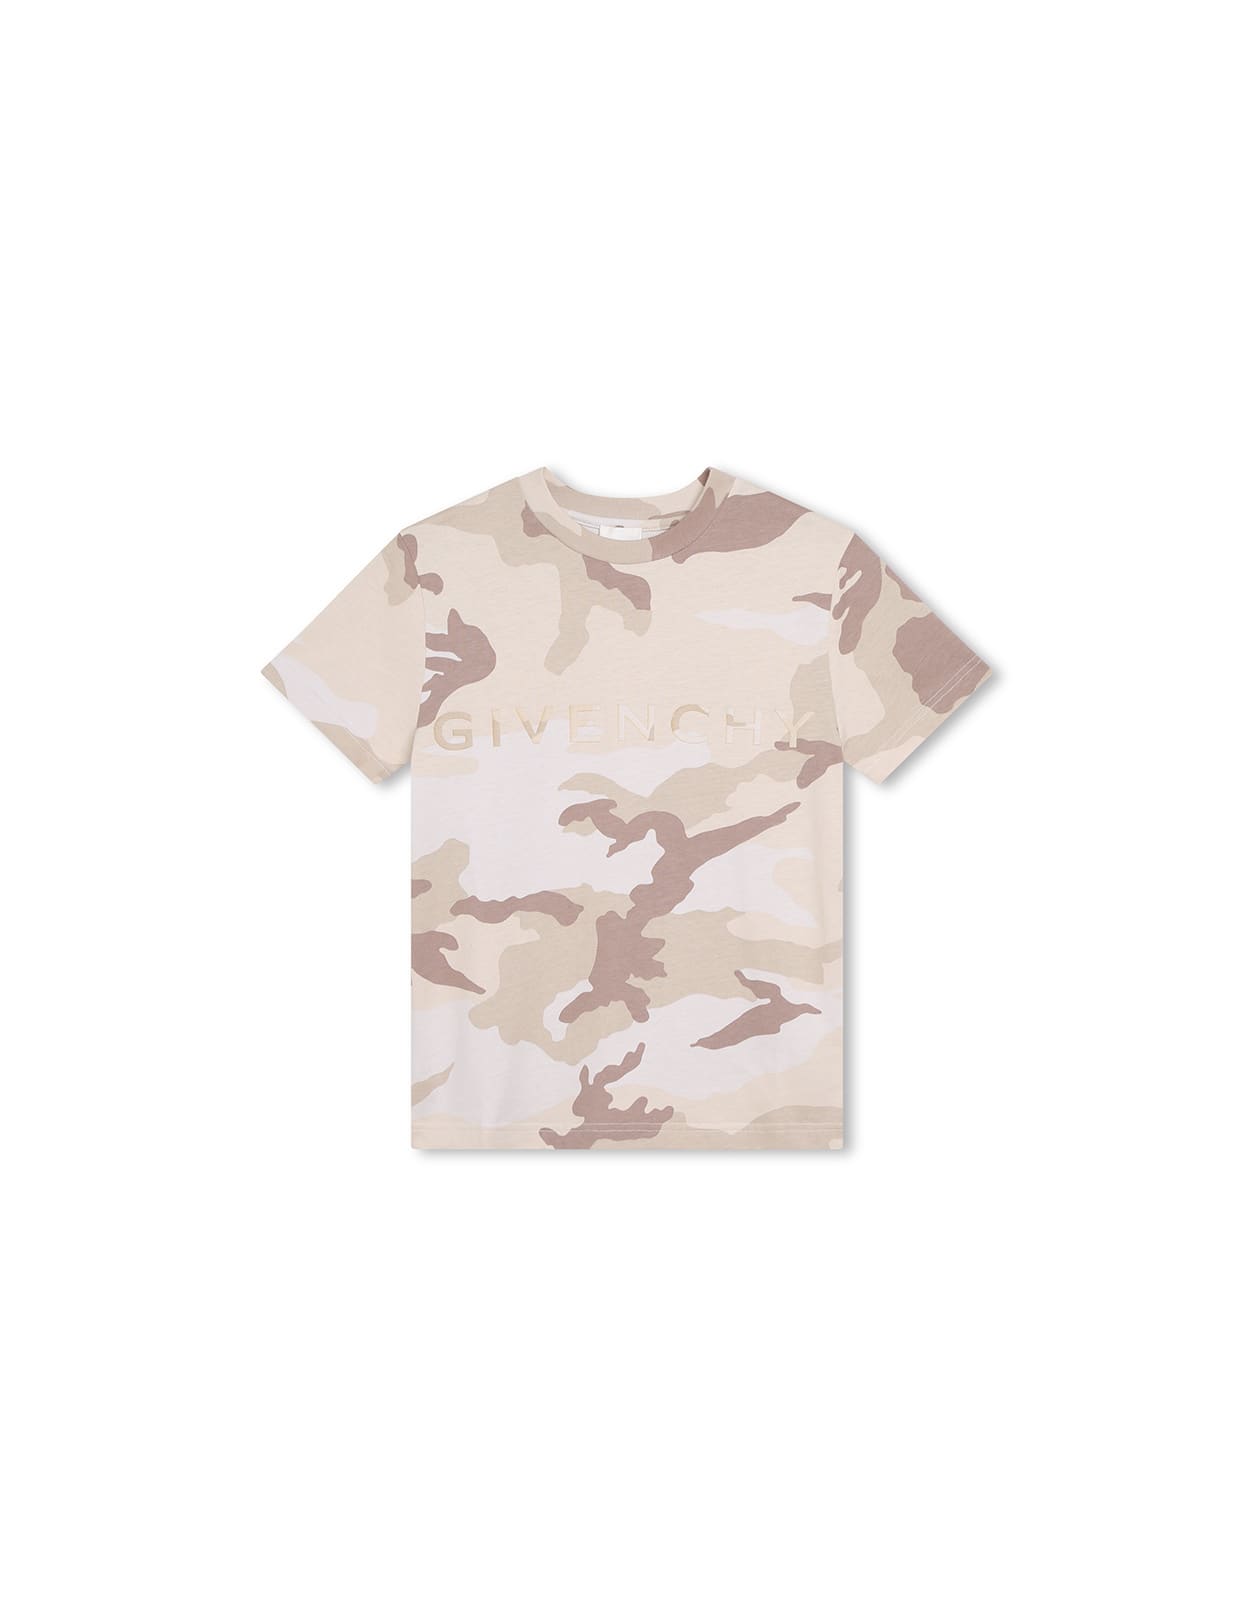 GIVENCHY BEIGE CAMOUFLAGE T-SHIRT WITH GIVENCHY 4G LOGO